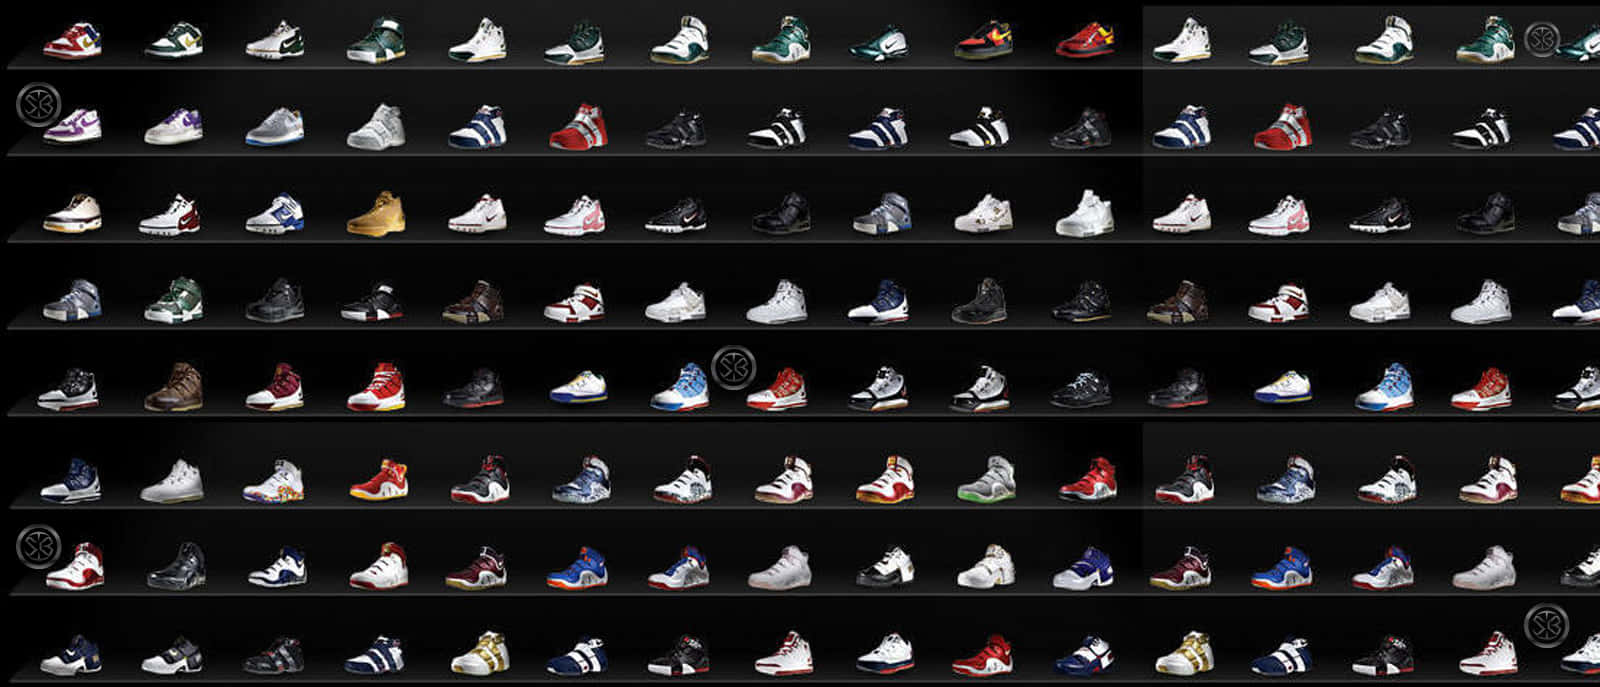 Get up and go in these classic sneakers! Wallpaper